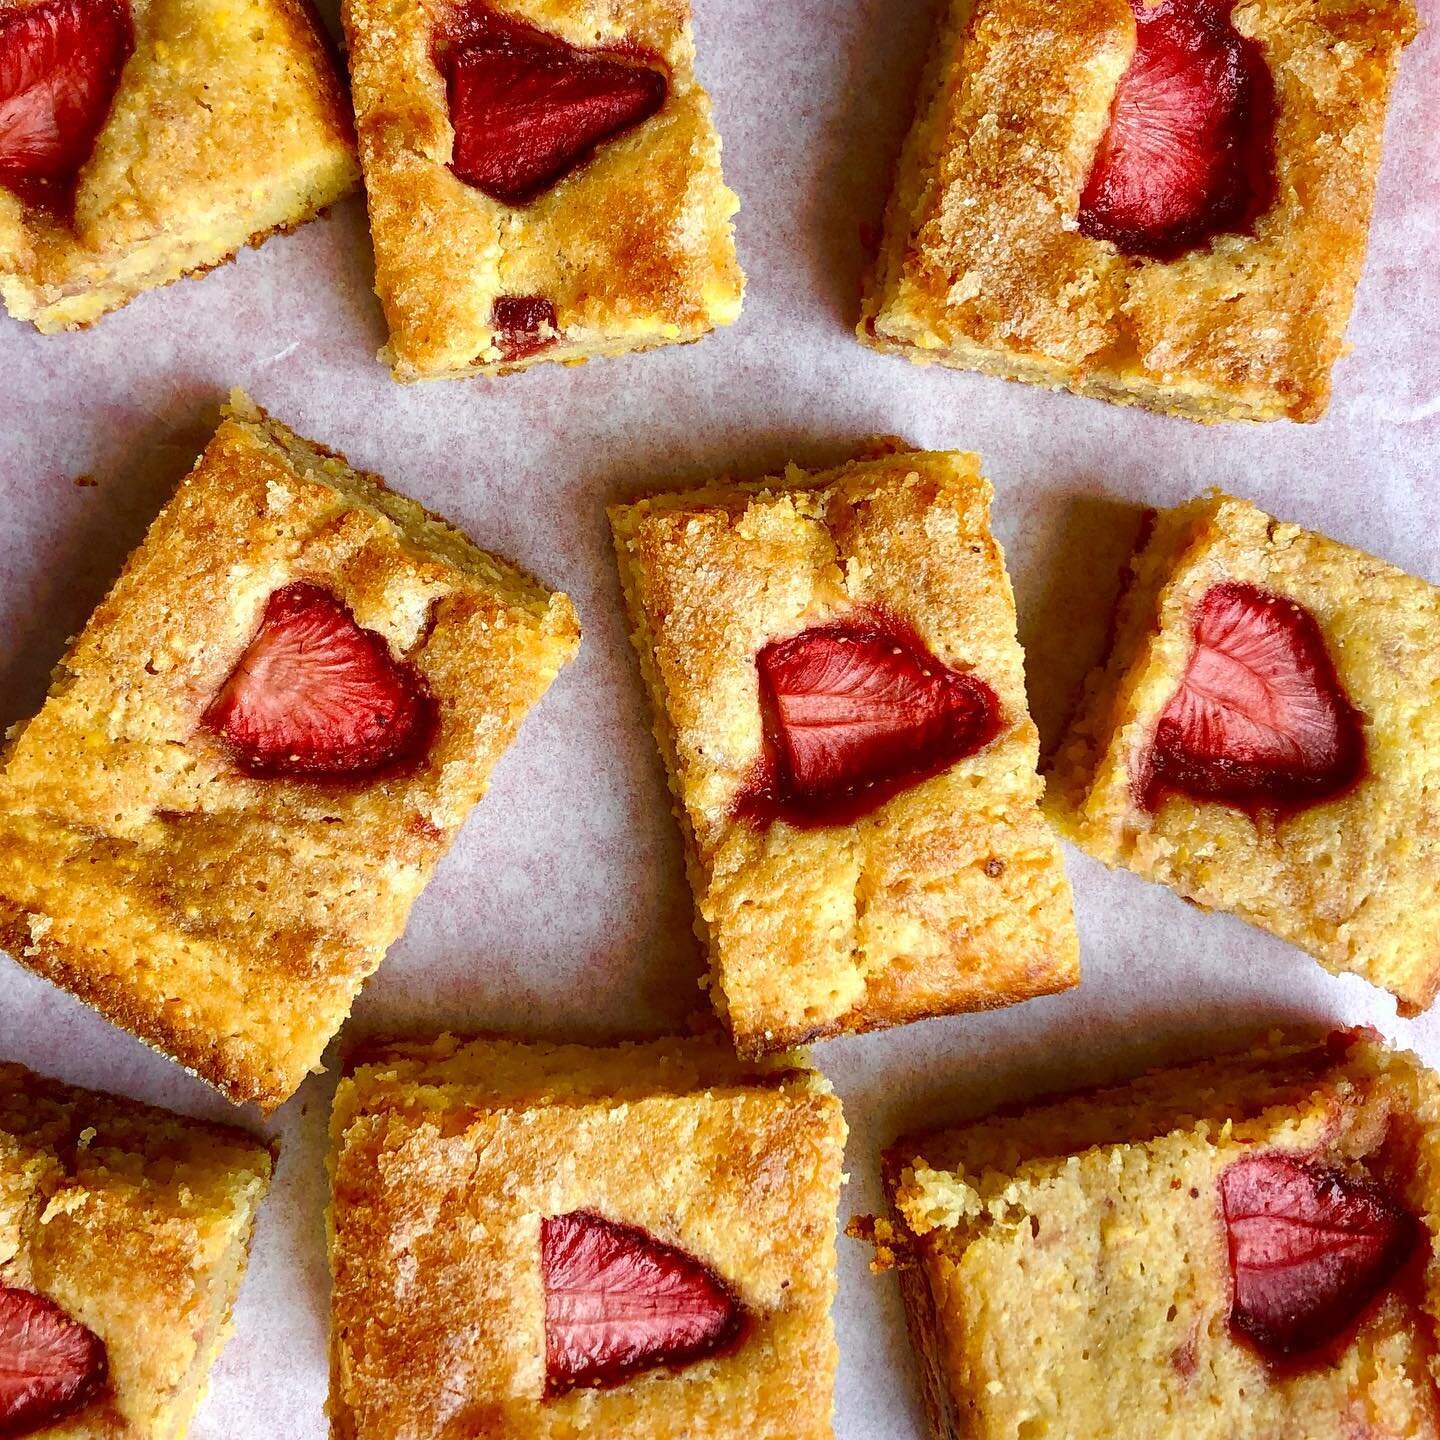 Strawberry cornmeal snacking cake (because Gemini friends require something a little extra for their birthdays, amirite?)
.
.
.
#cake #strawberries #strawberry #snacking #snackingcakes